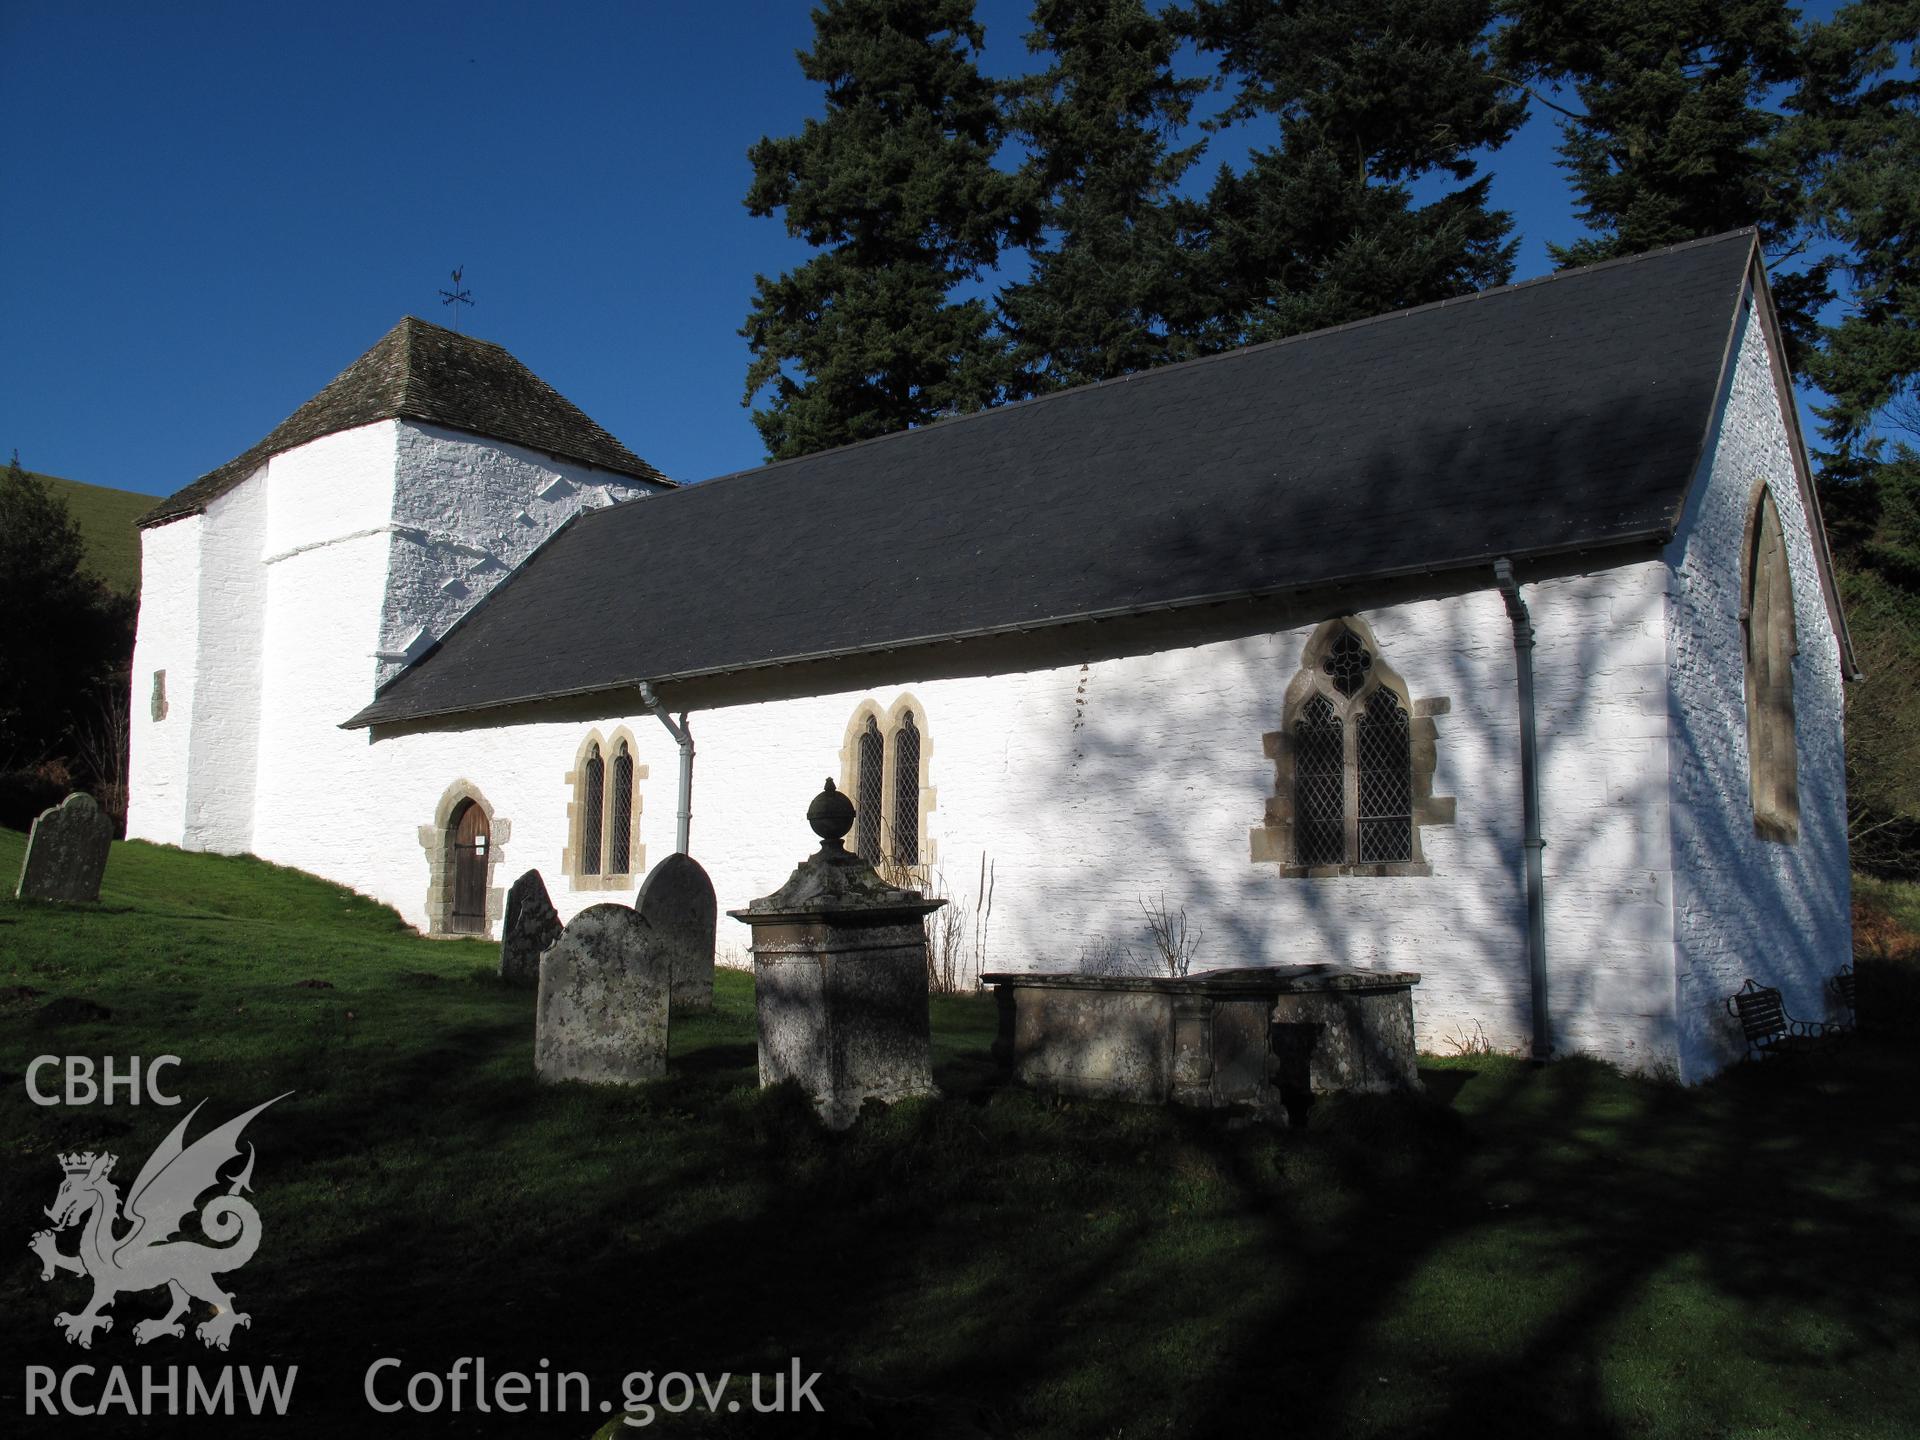 St Mary's Church, Pilleth, from the south, taken by Brian Malaws on 15 November 2010.